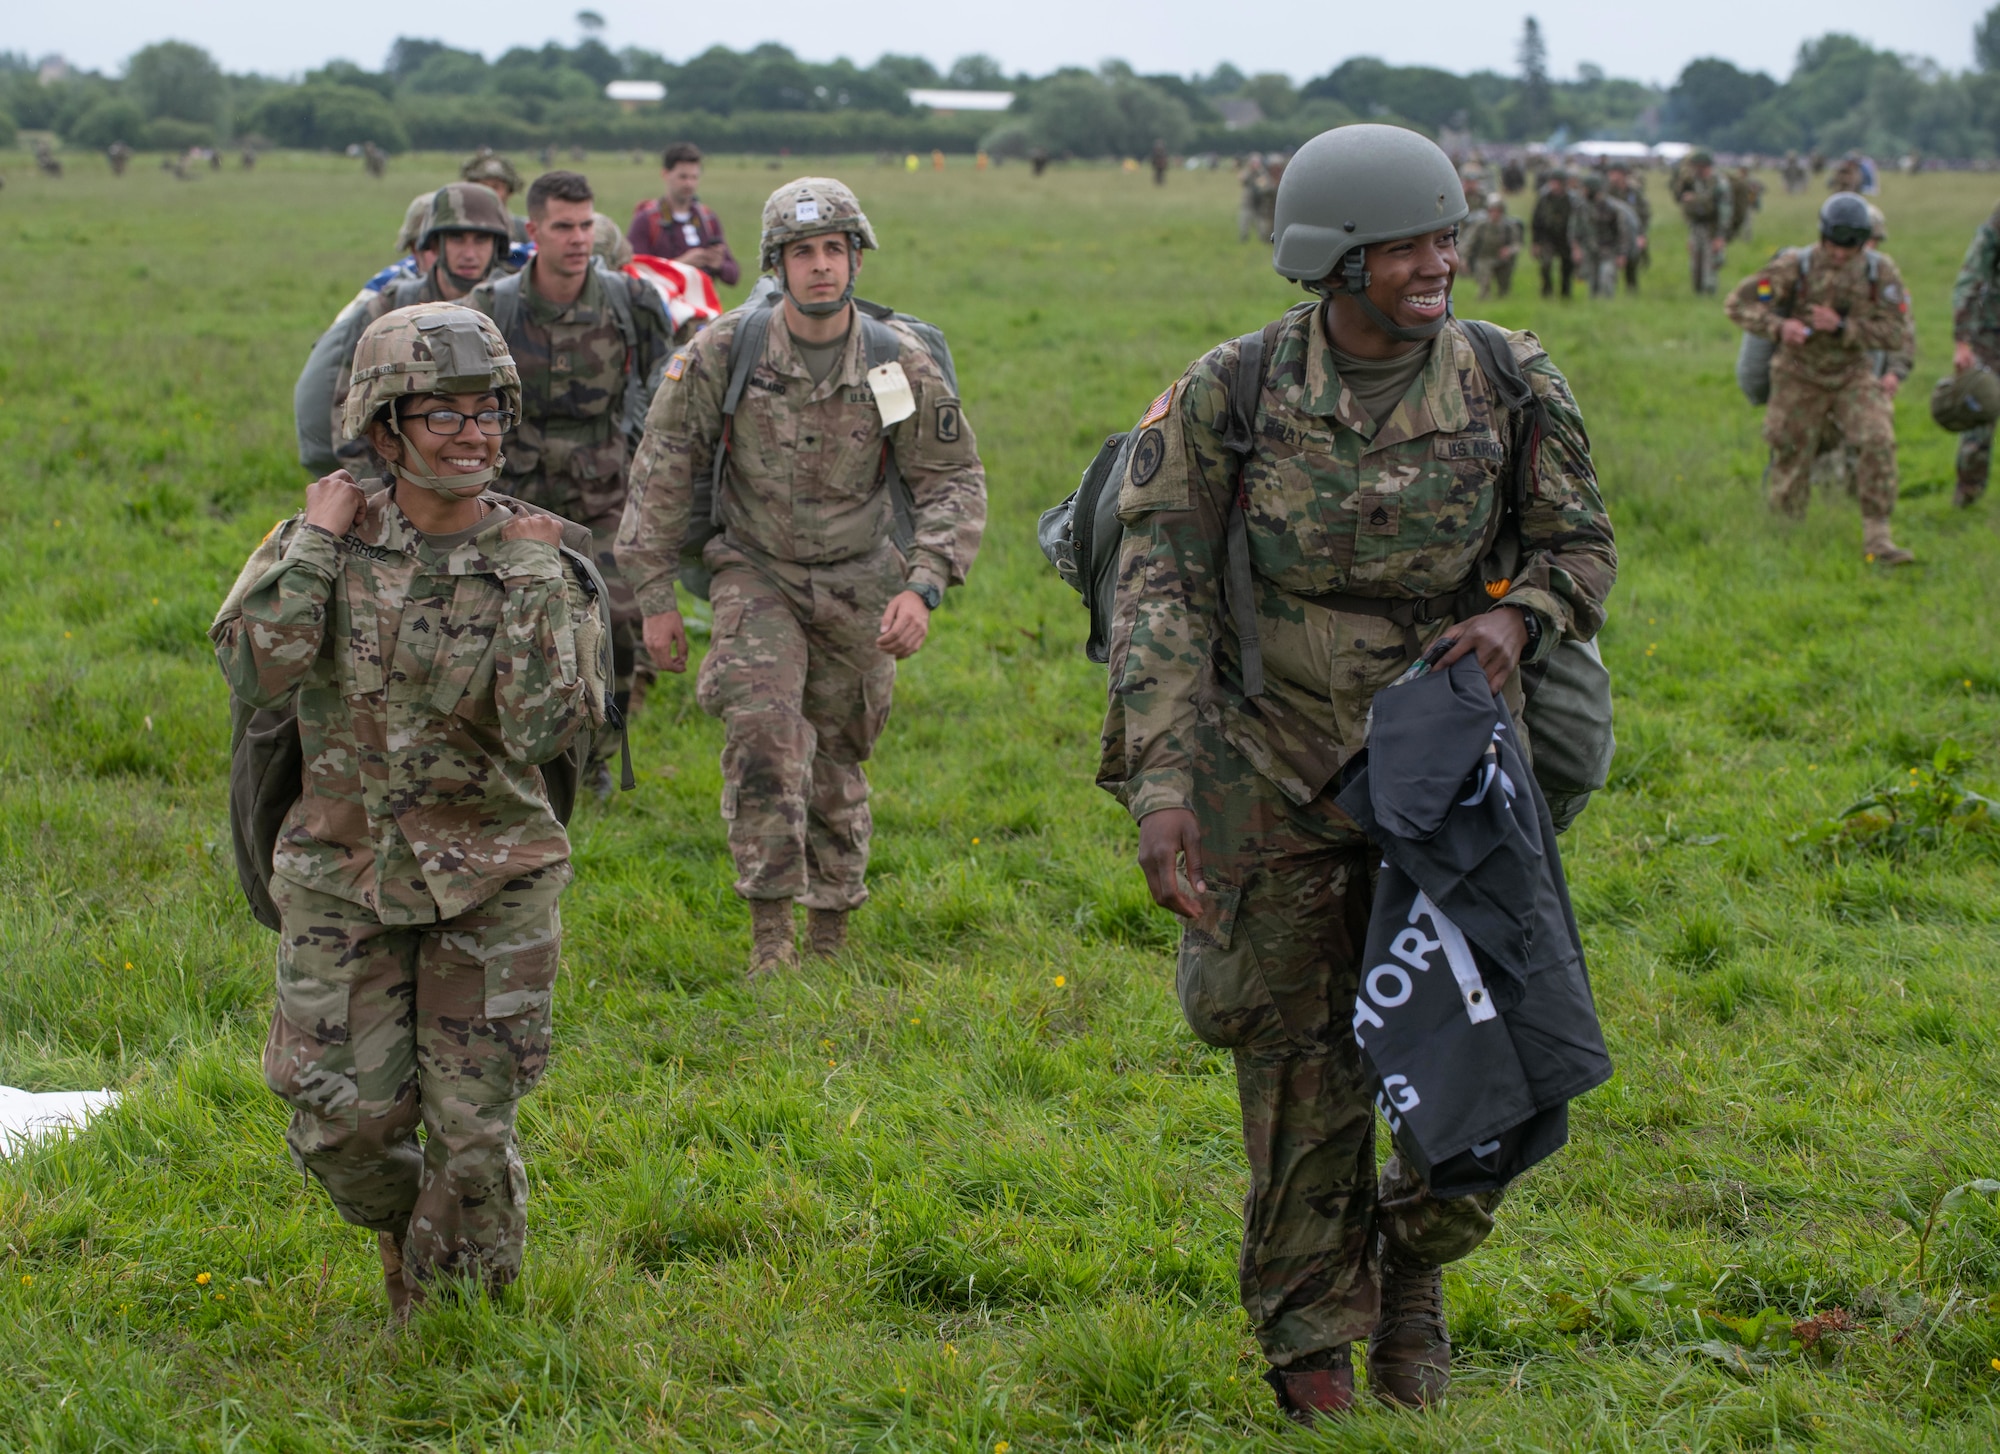 Service members leave the drop zone after a jump during the D-Day 75 Commemorative Airborne Operation in Sainte-Mere-Eglise, France, June 9, 2019, which honors the epic airborne operation conducted by Allied forces on June 6, 1944. Seventy-five years later, the bravery and heroism by all allies during World War II continues to resonate with U.S. forces in Europe - who remain steadfast in their commitment to European allies and partners. (U.S. Air Force photo by Airman 1st Class Jennifer Zima)